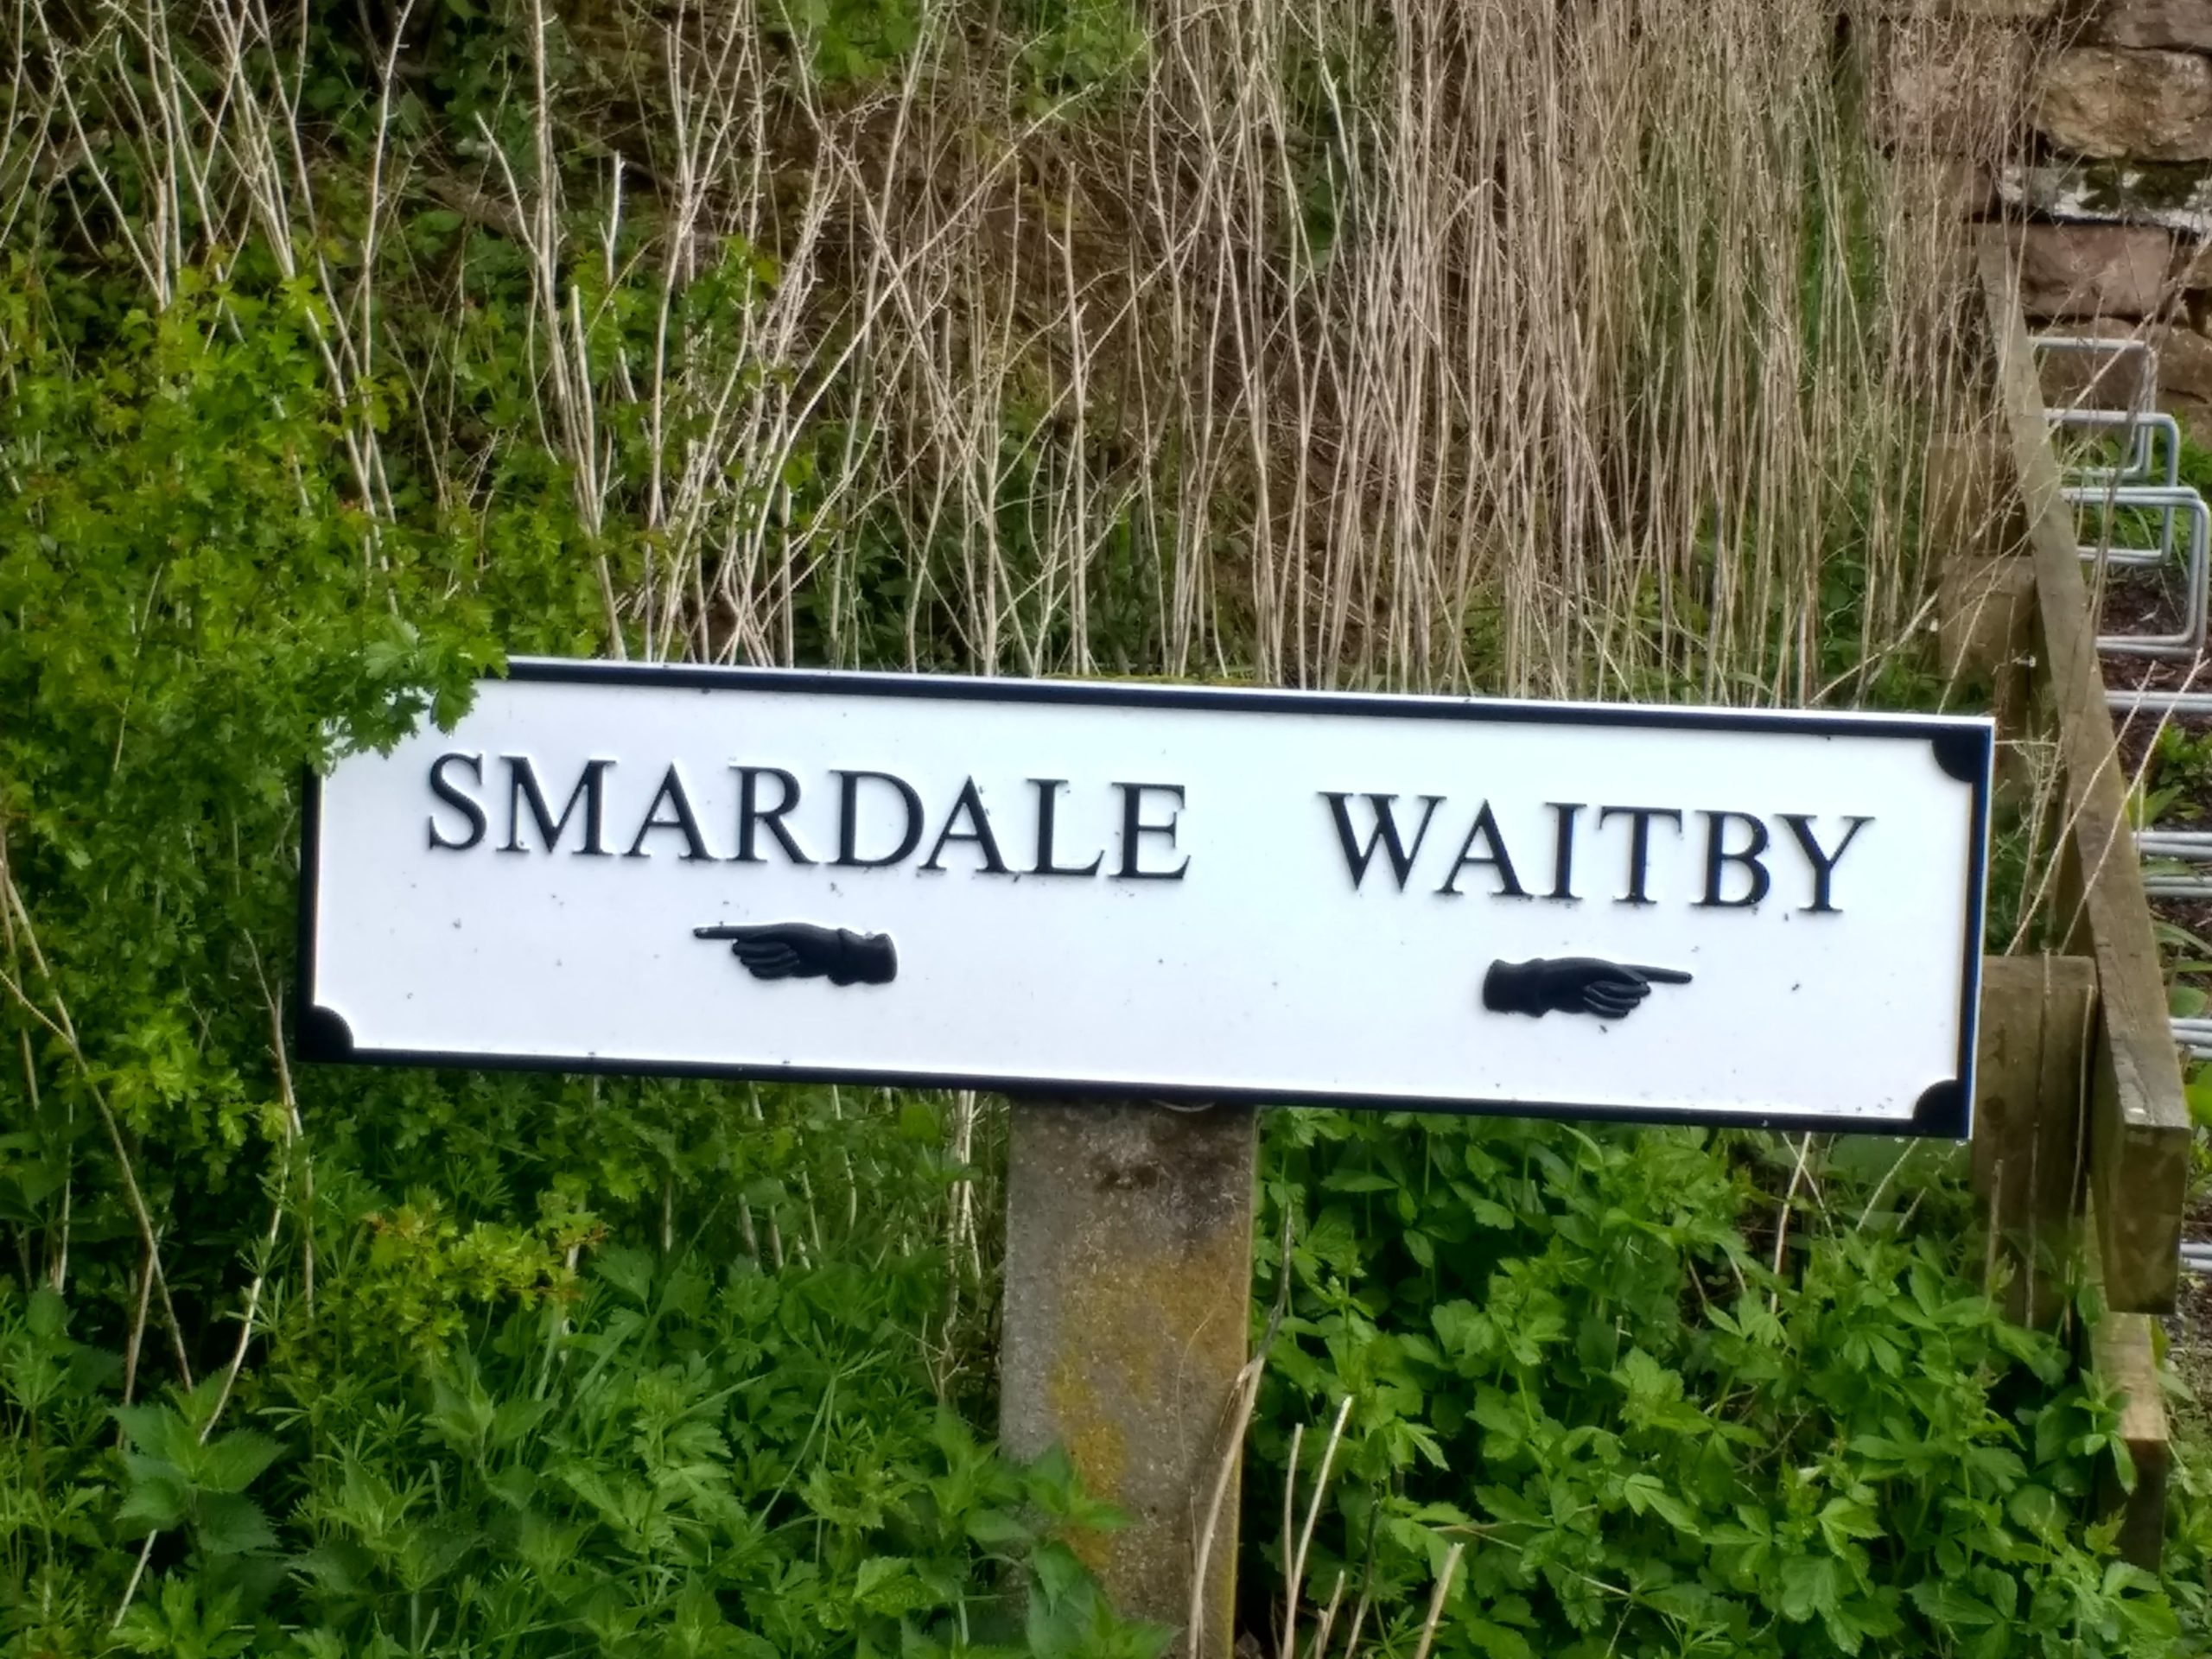 Smardale or Waitby?